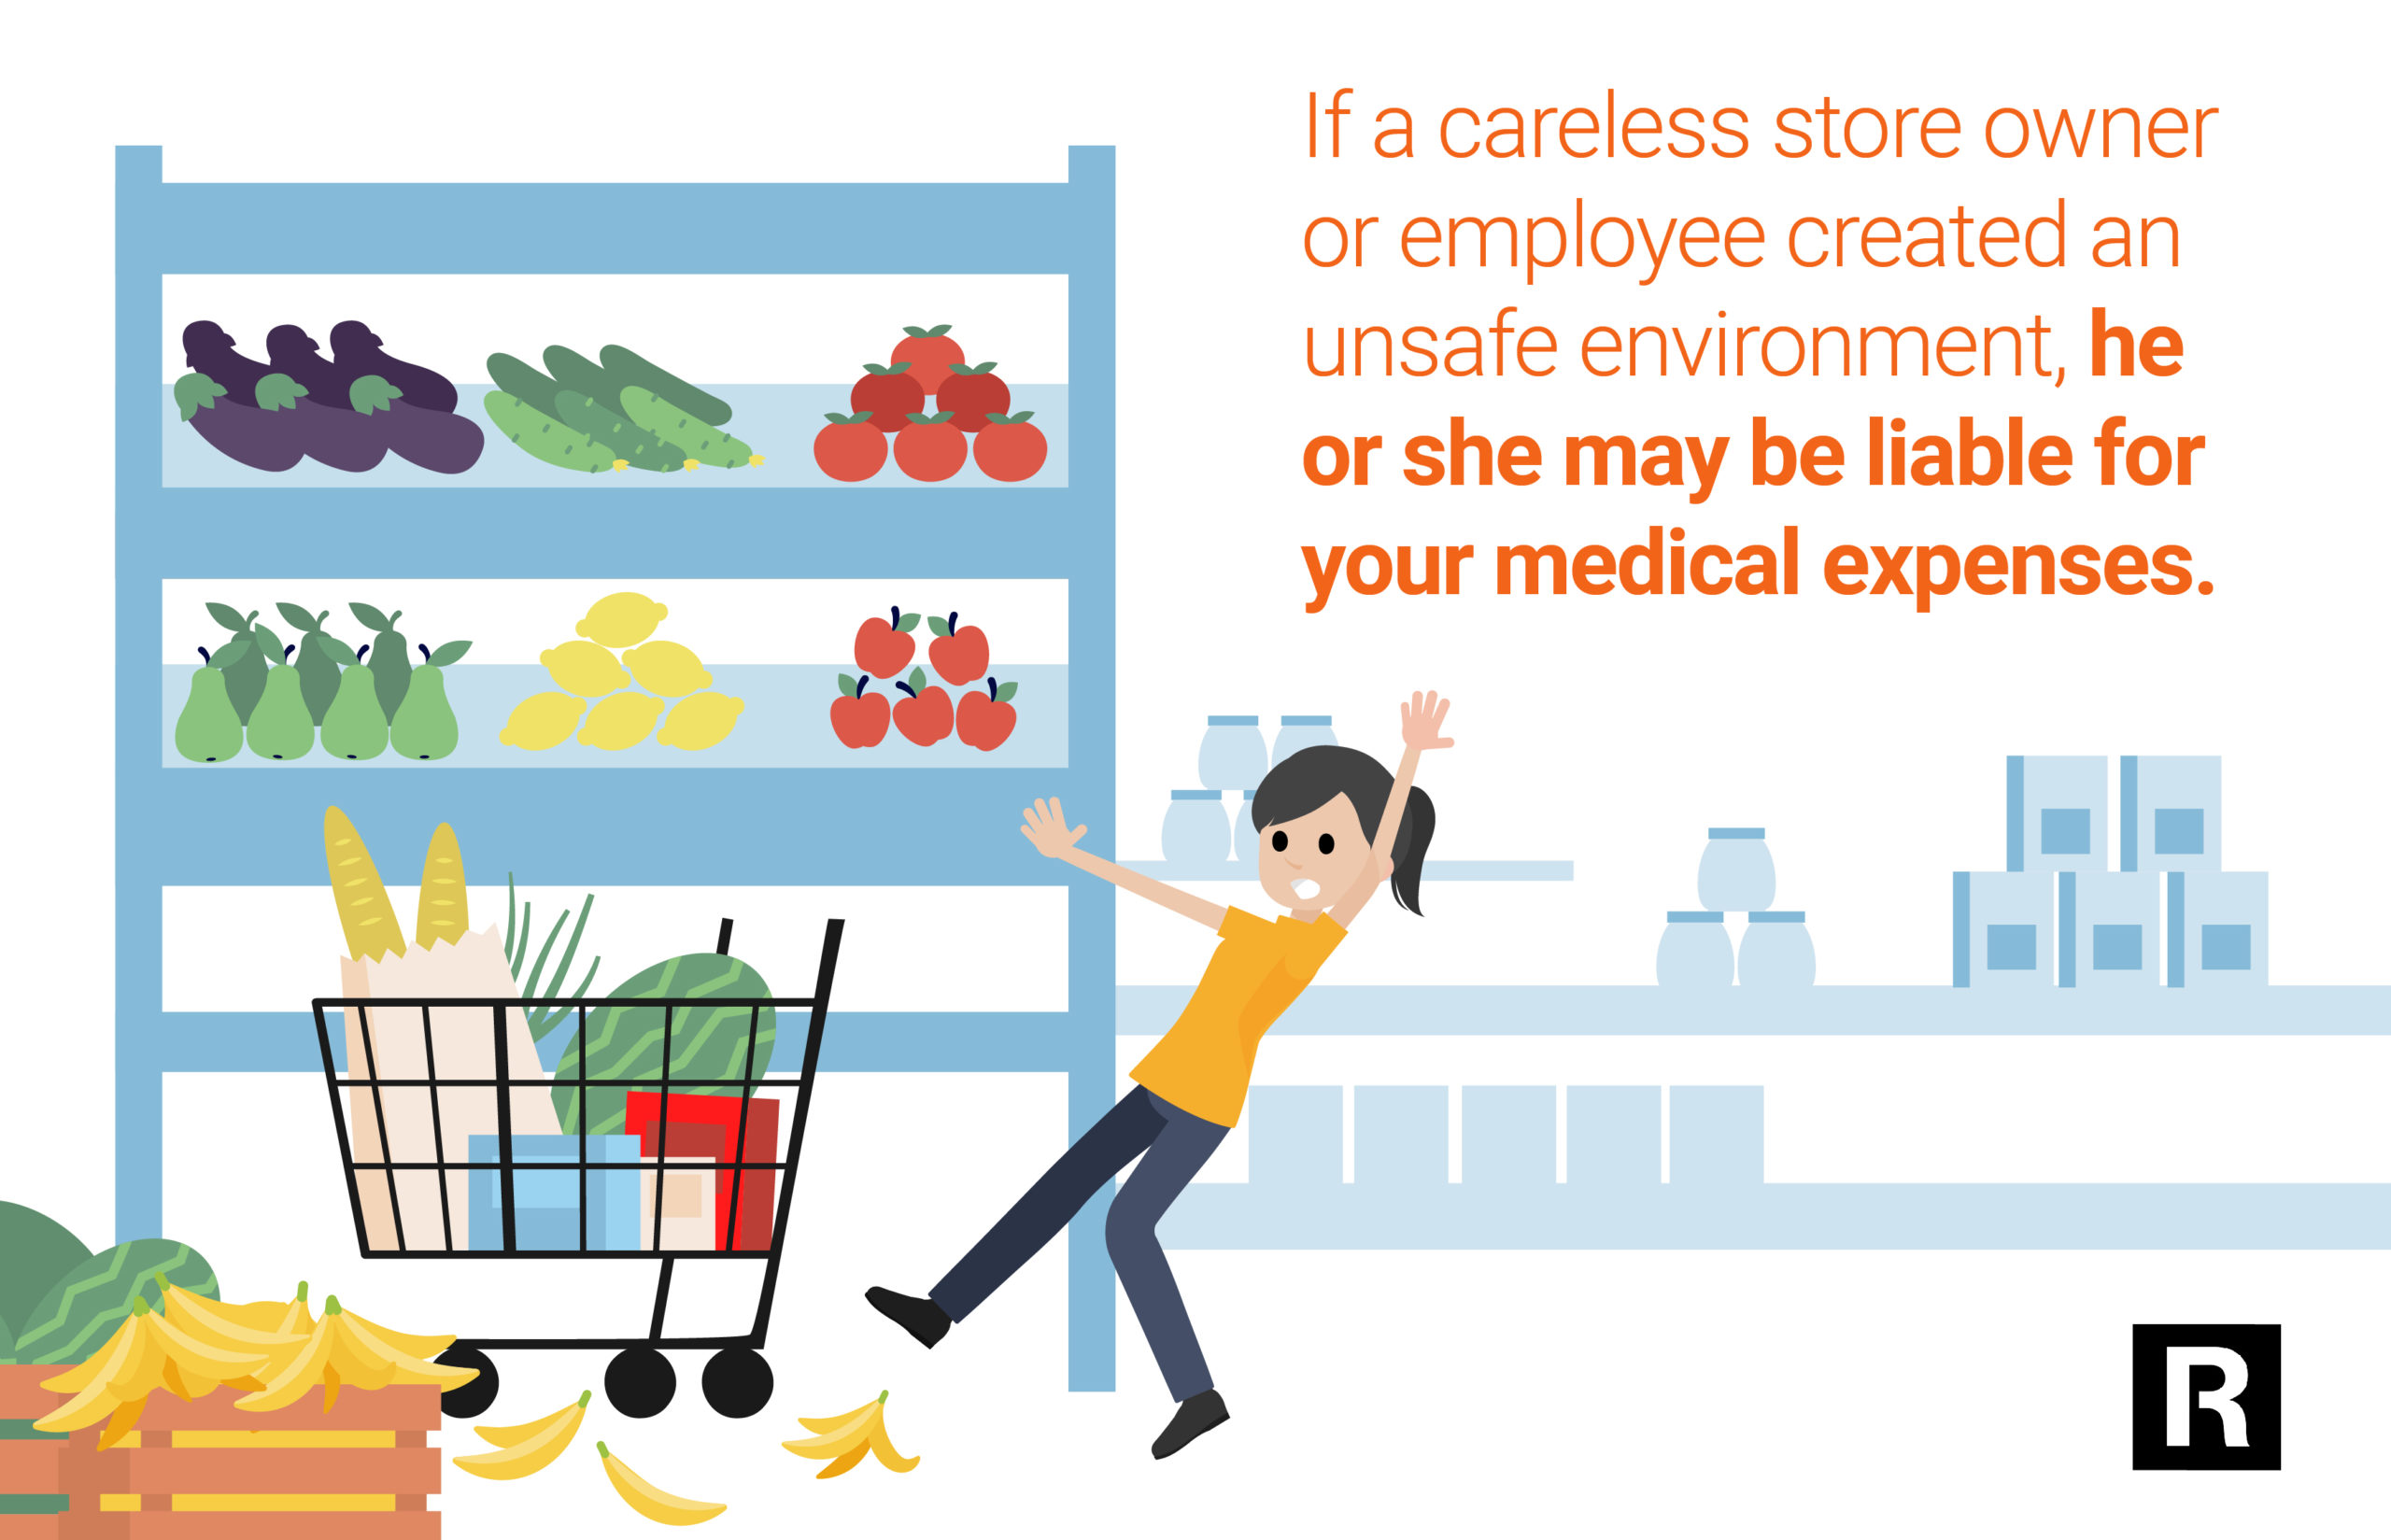 If a careless store owner or employee created an unsafe enviroment, he or she may be liable for your medical expenses.